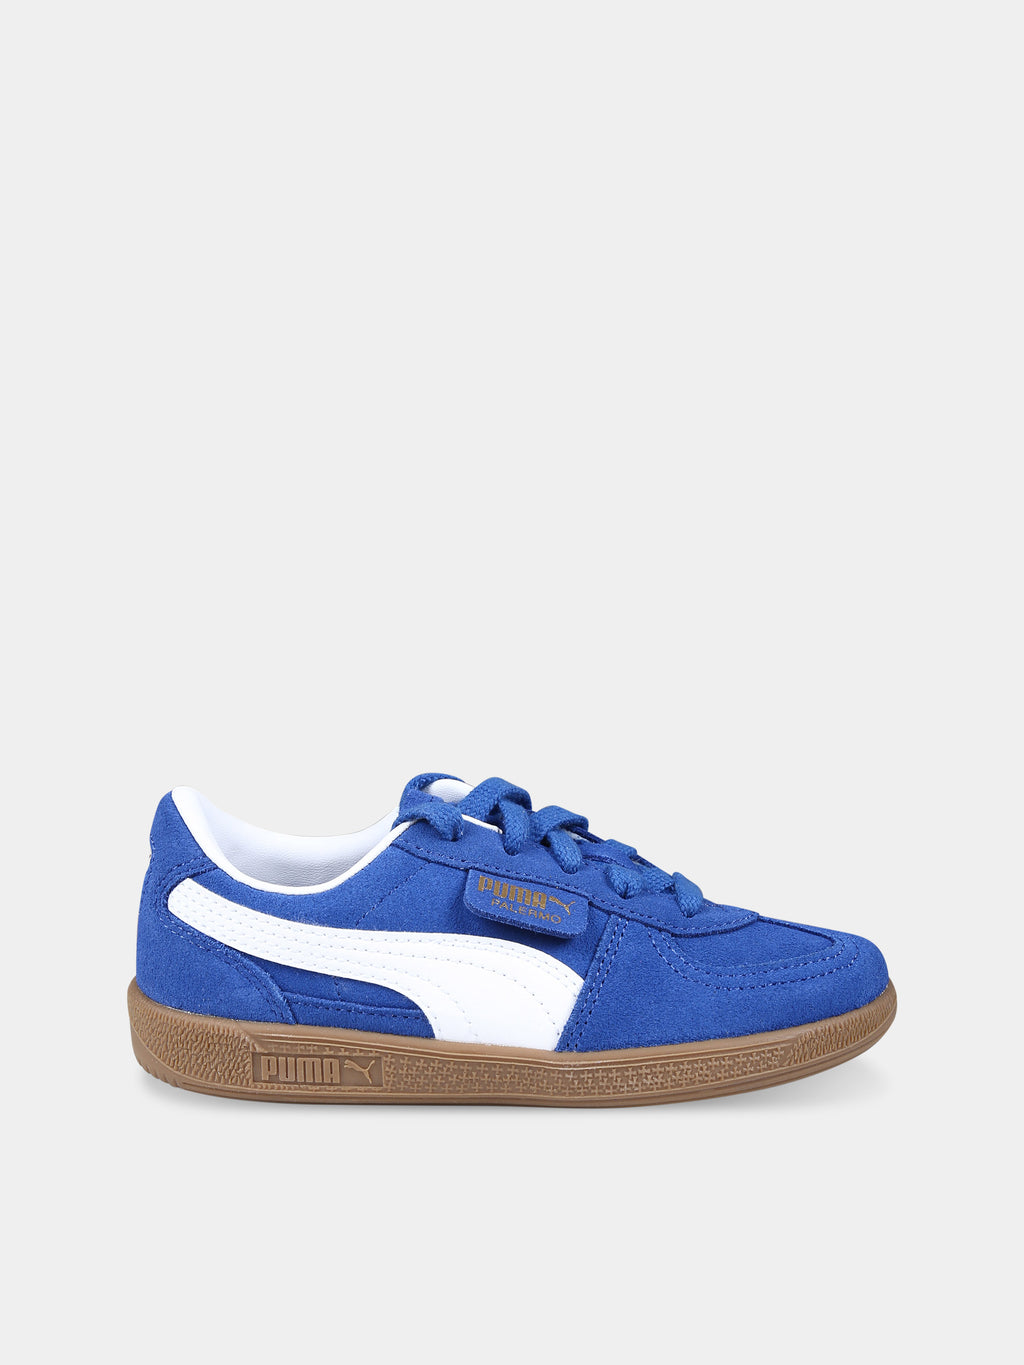 Palermo PS light blue low sneakers for kids